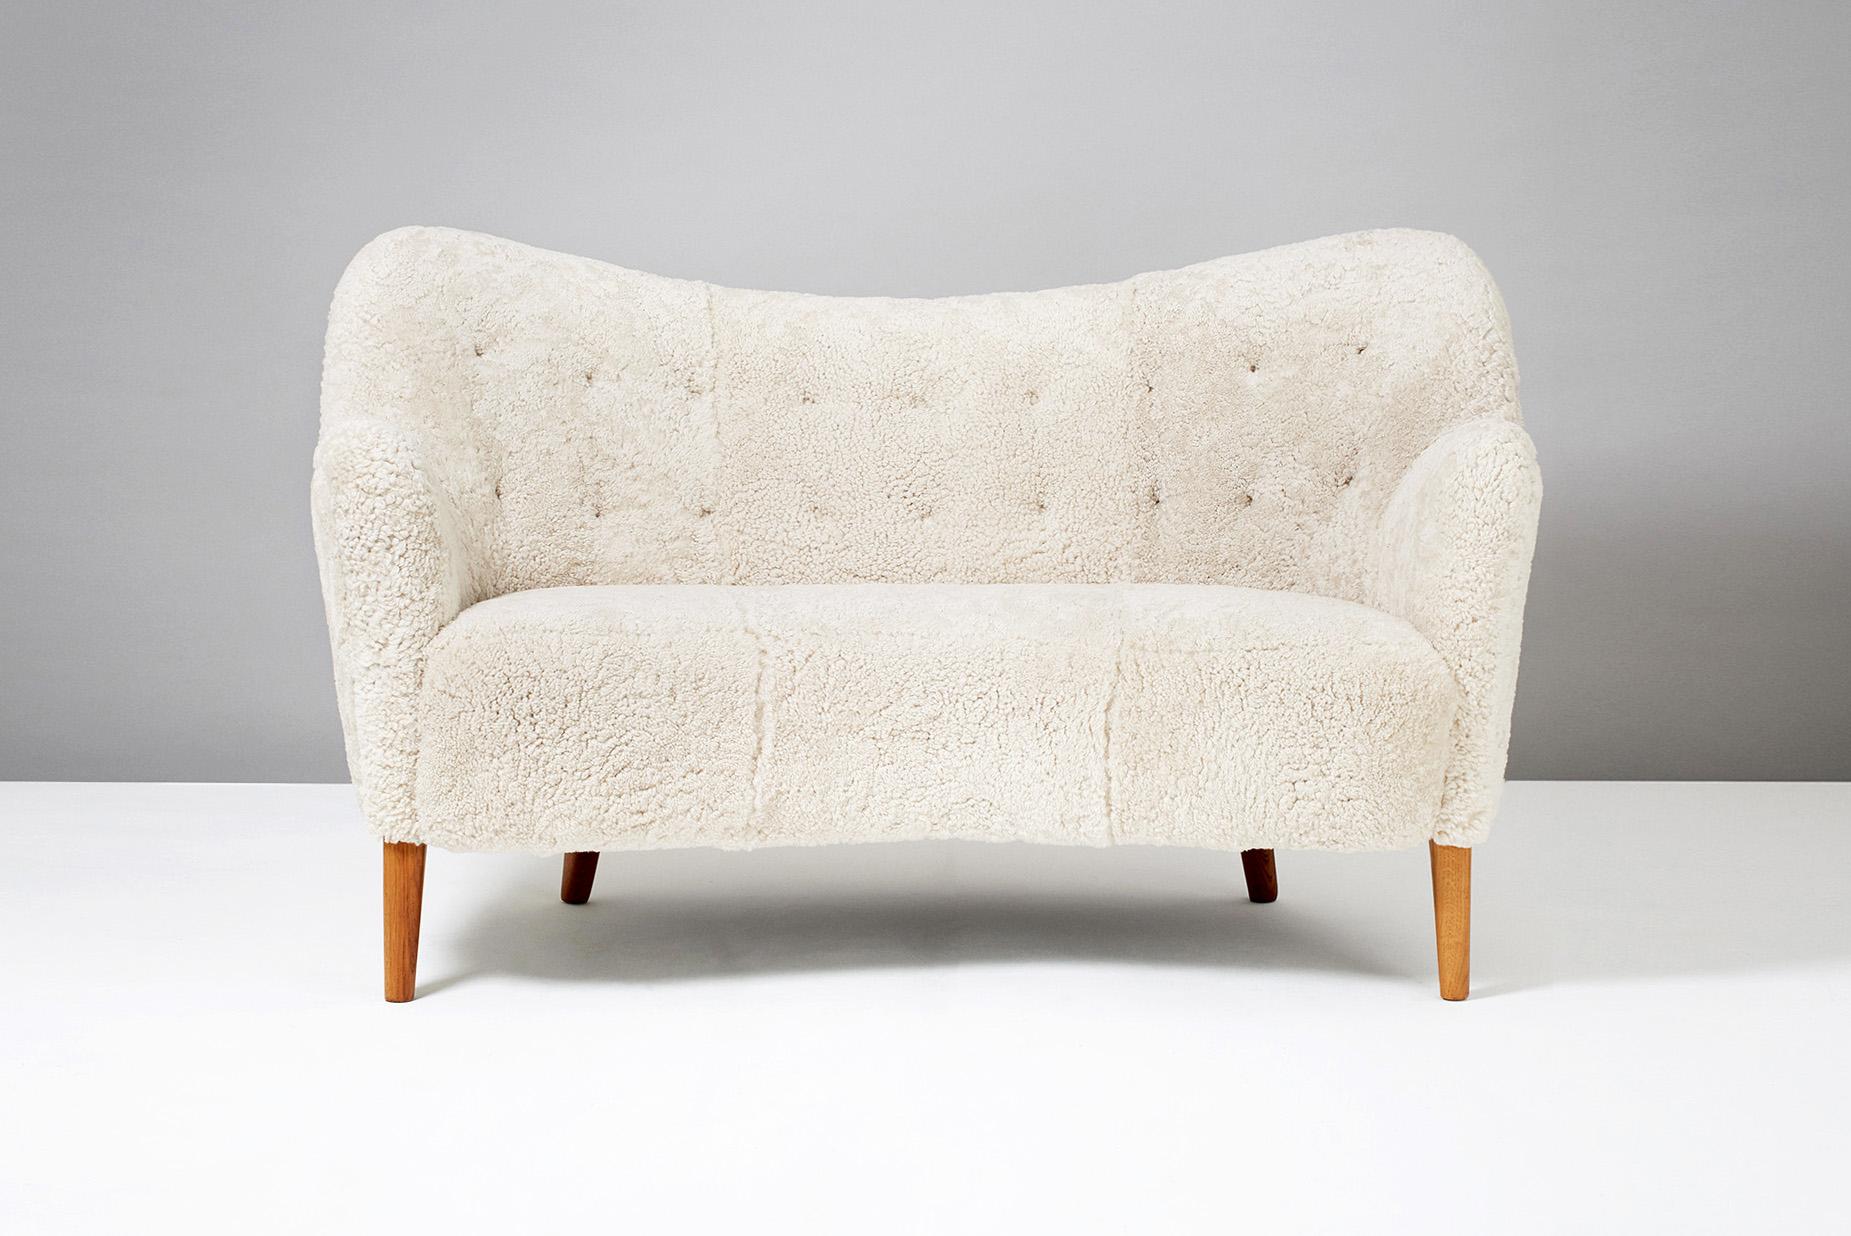 Nanna Ditzel (attributed), Model 185 Sofa, 1952

Rarely seen curved love seat sofa from Danish cabinetmakers Slagelse Mobler. Attributed to Nanna Ditzel. Oiled oak legs and new sheepskin upholstery.